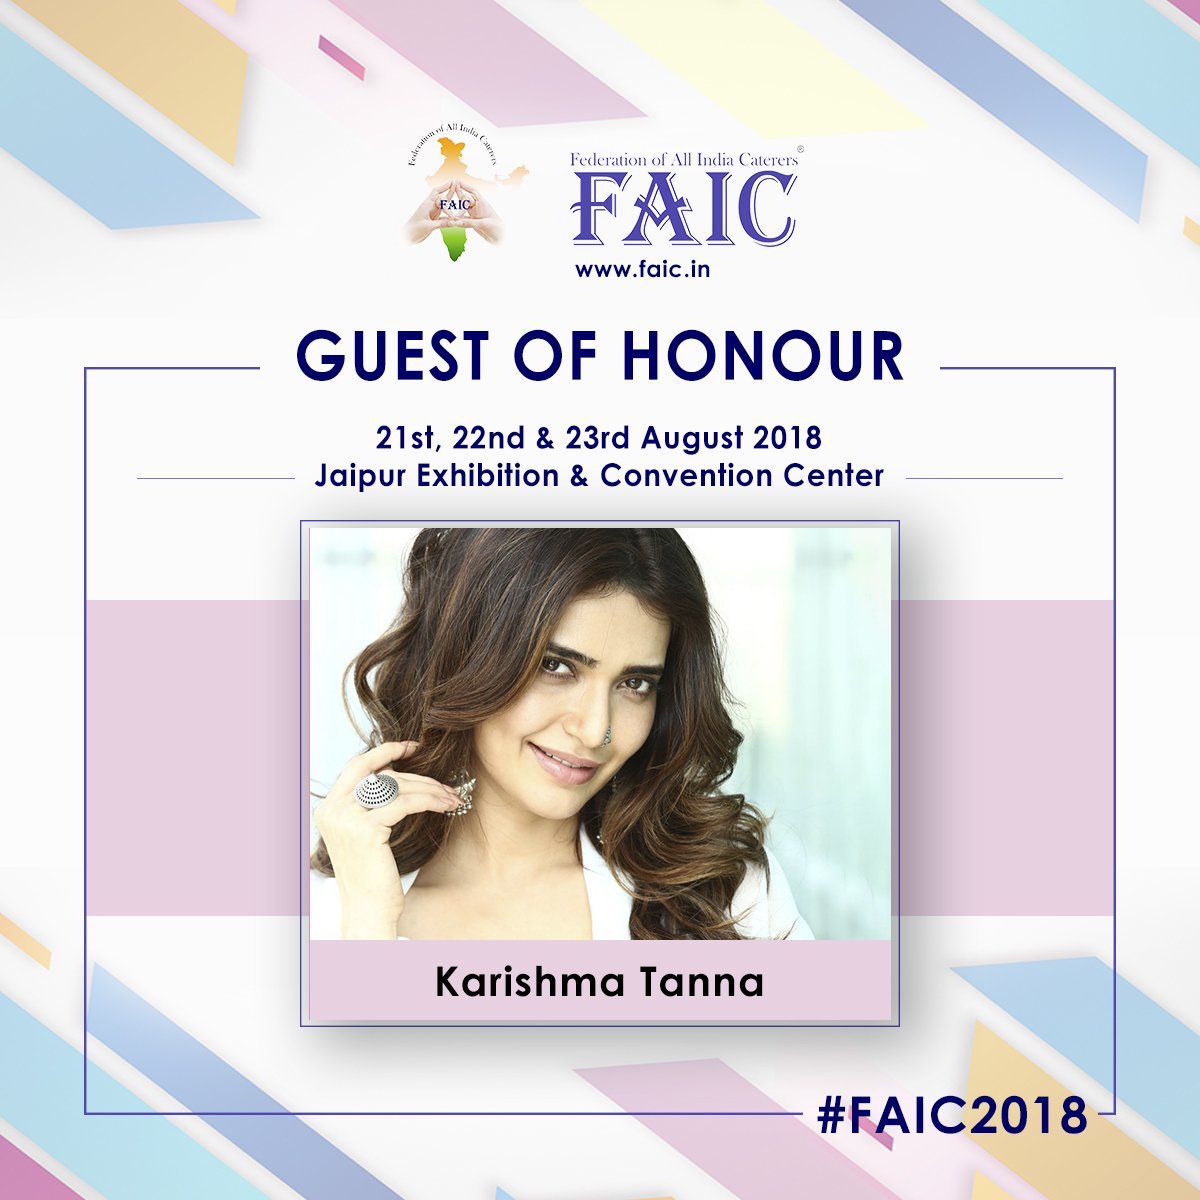 Our esteemed guest of honour at FAIC 2018
@KARISHMAK_TANNA 
#faic2018 #event #chiefguest #guest #foodandbeverages #foodcatering #cateringexhibition #foodevent #catererlife #cateringevent #foodbusinessnetworking #startupindia #foodexhibition #catering #convesation #restaurant